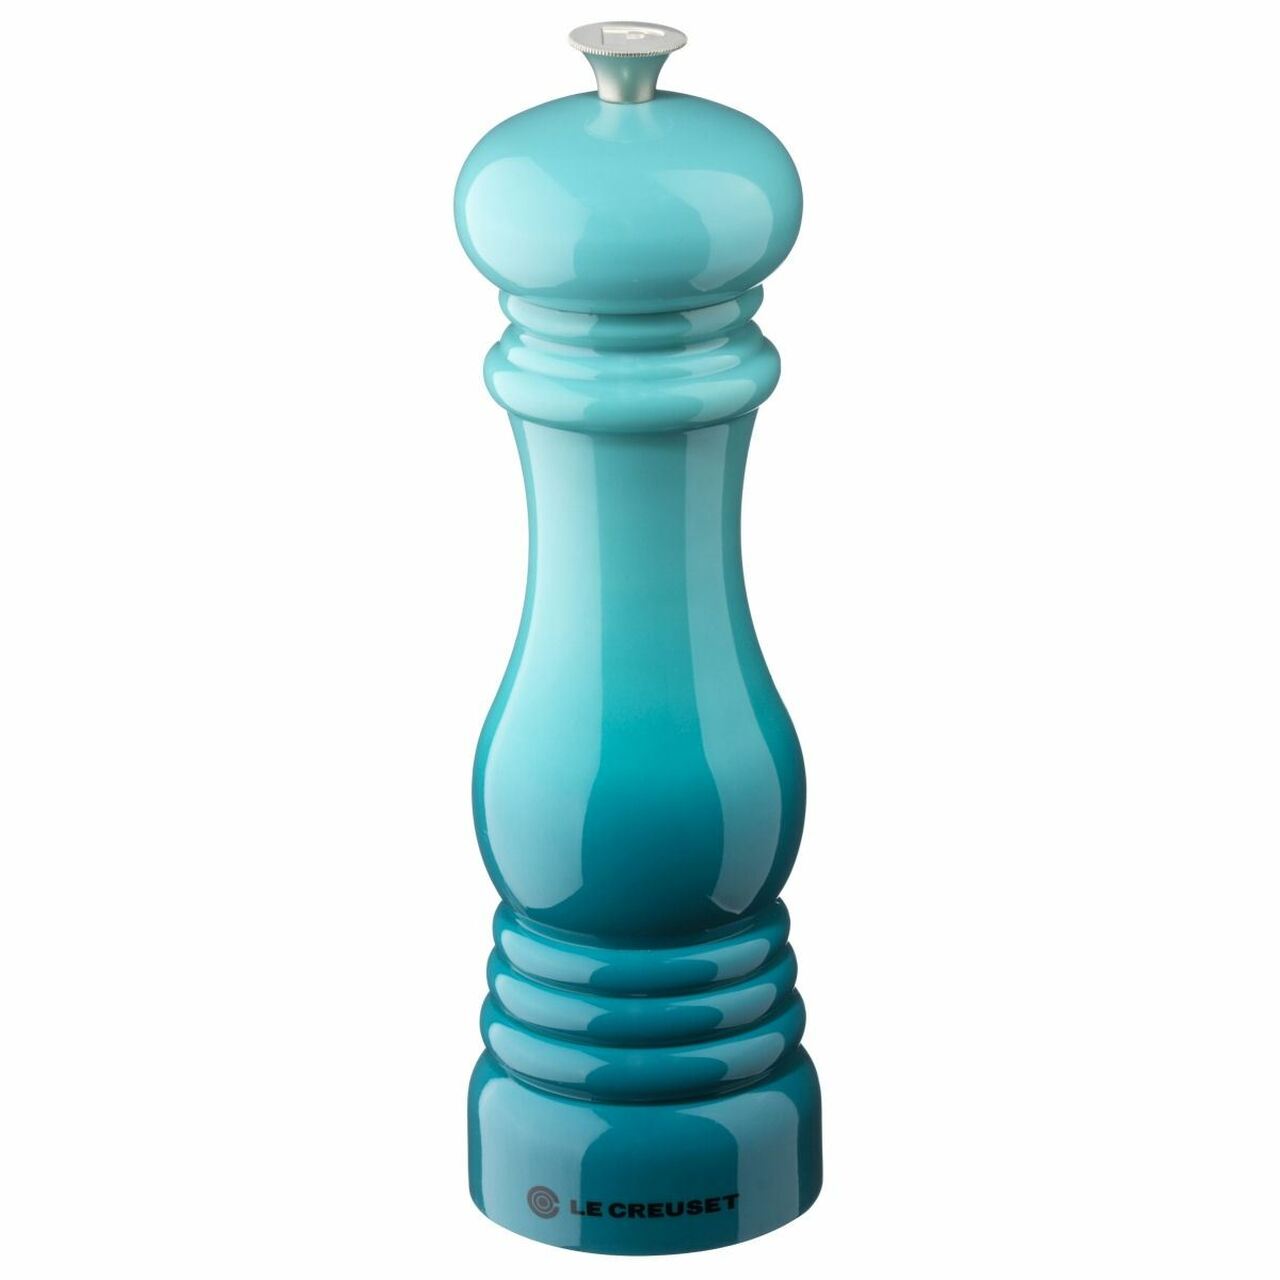 Le Creuset Pepper Mill - Teal